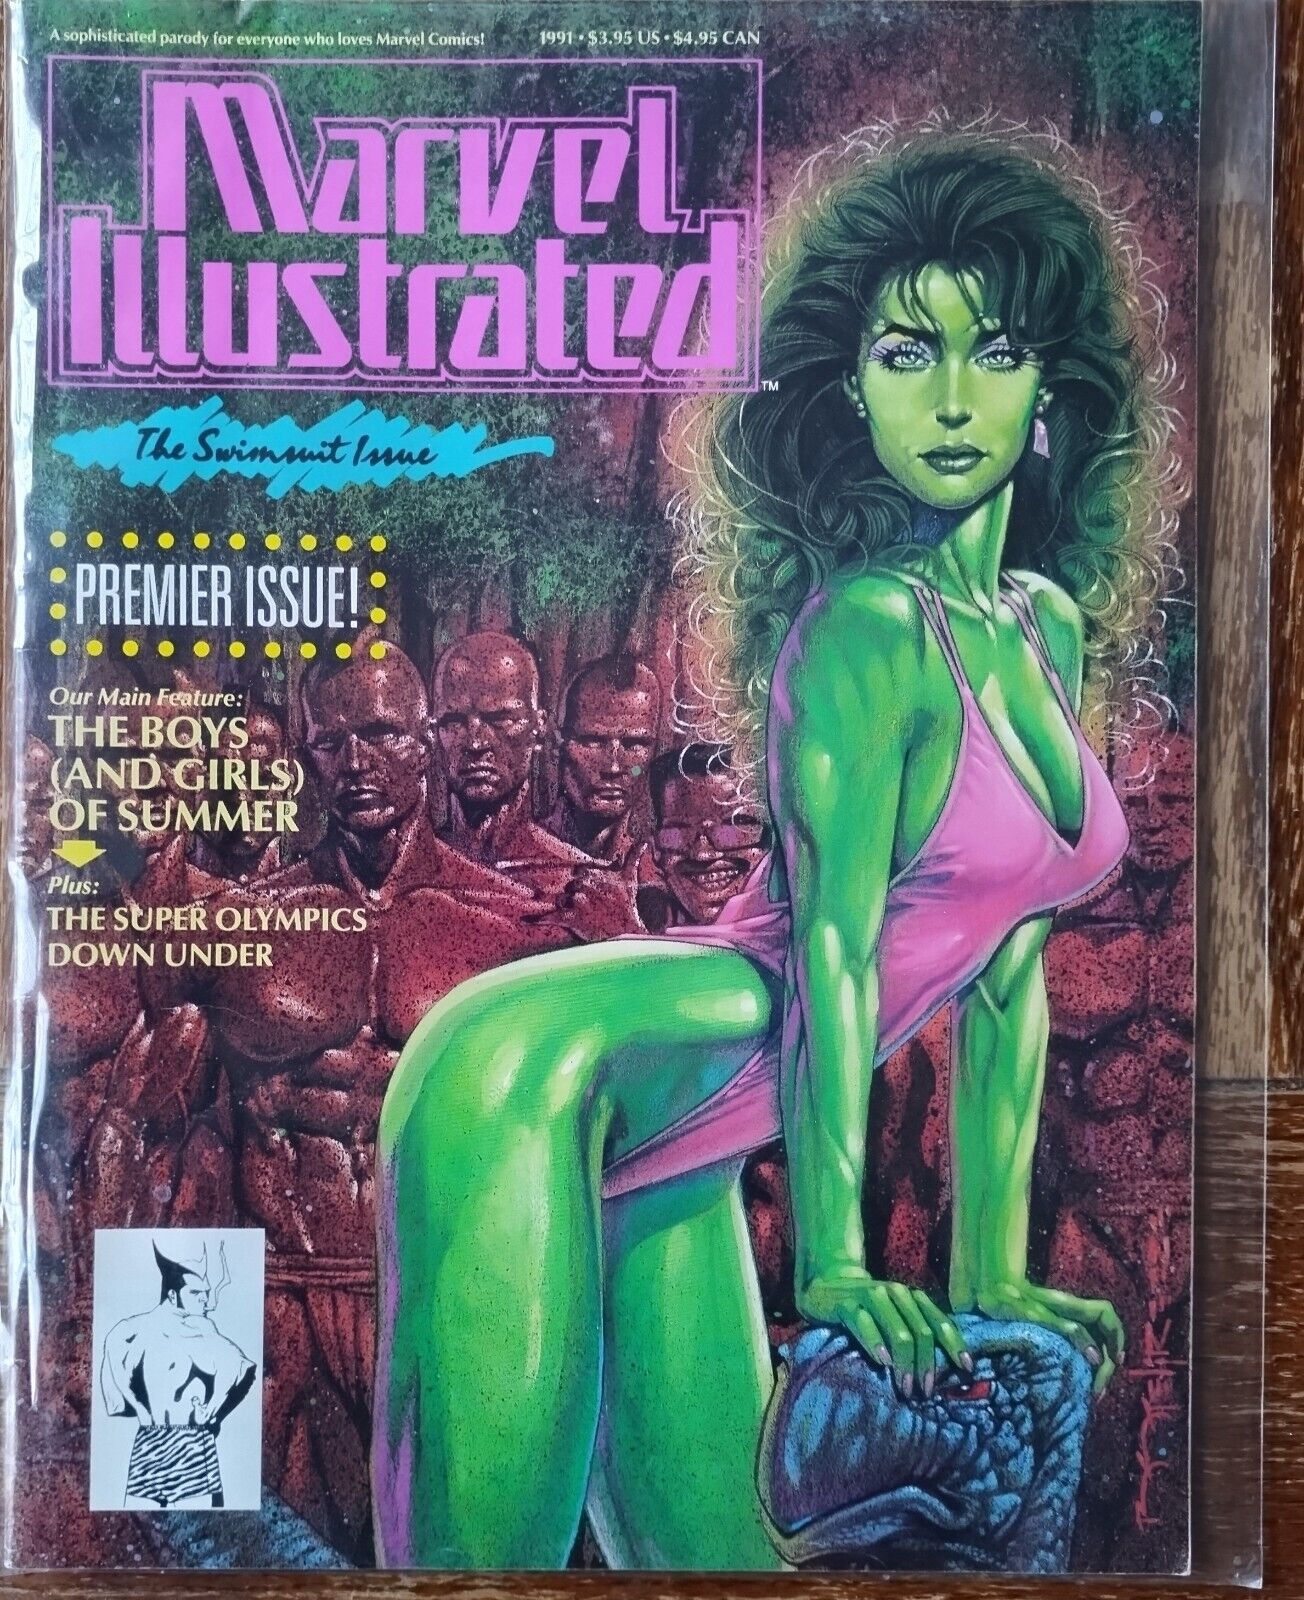 1991 MARVEL ILLUSTRATED THE SWIMSUIT ISSUE - PREMIER ISSUE -  Excellent To Mint.